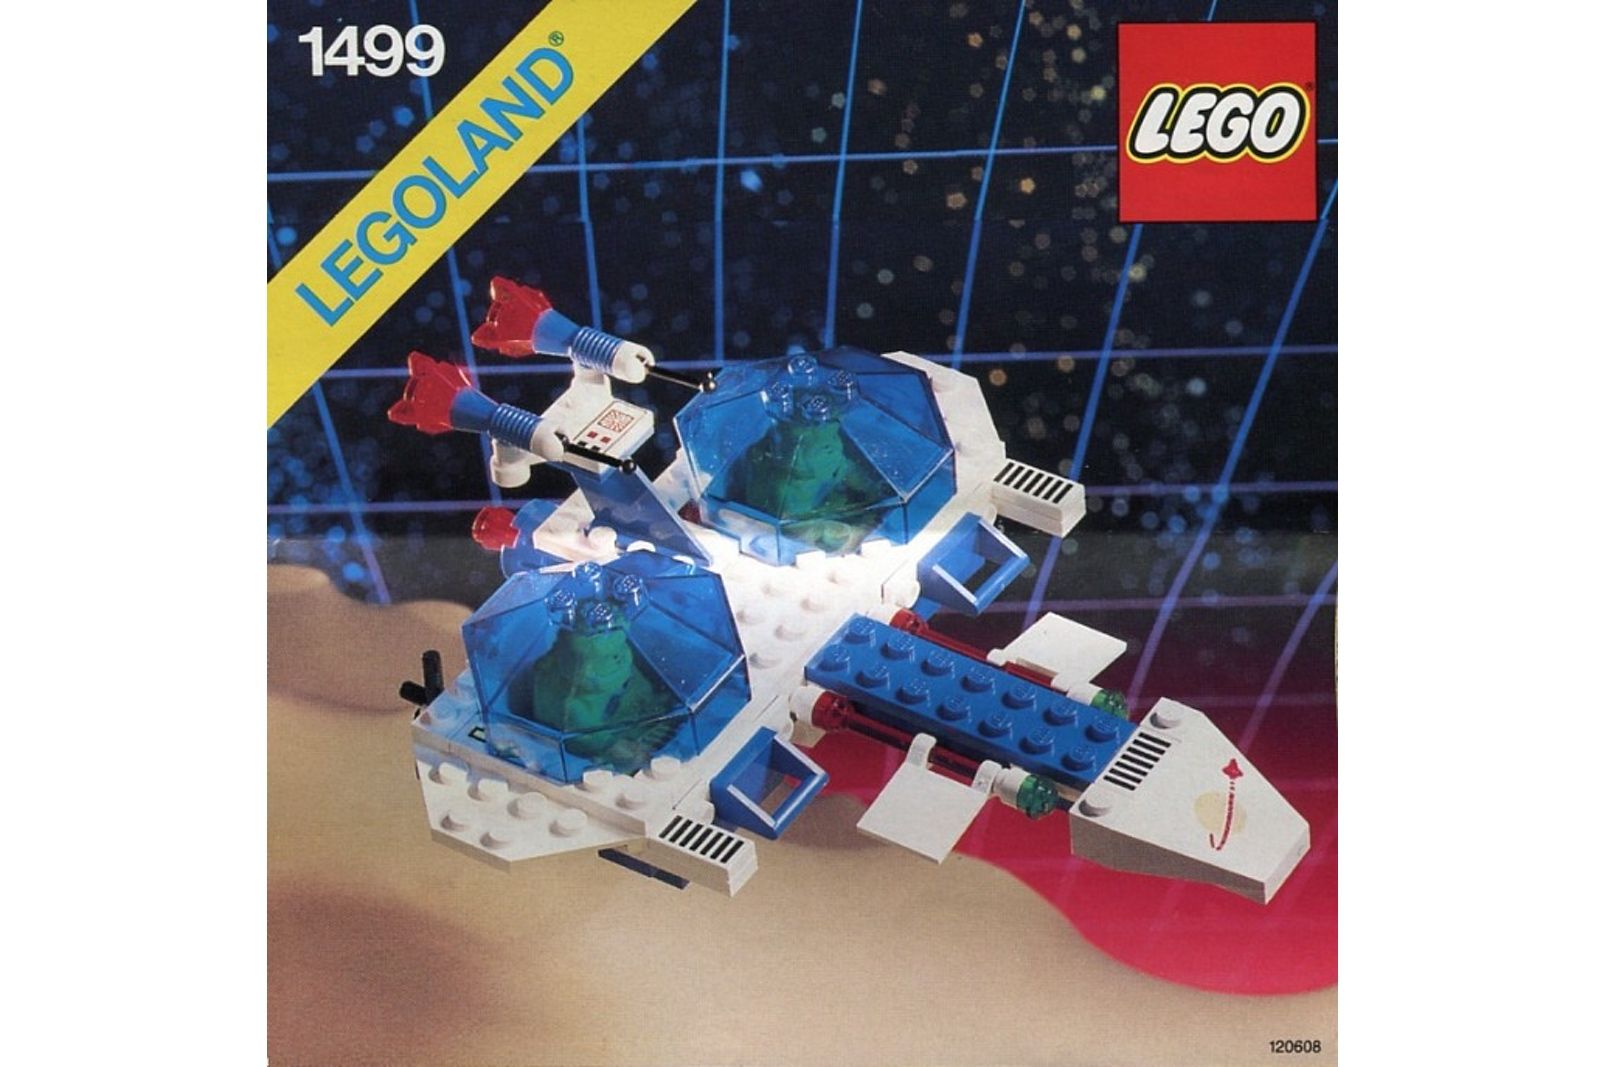 Remember These The Best Lego Sets Of All Time image 155